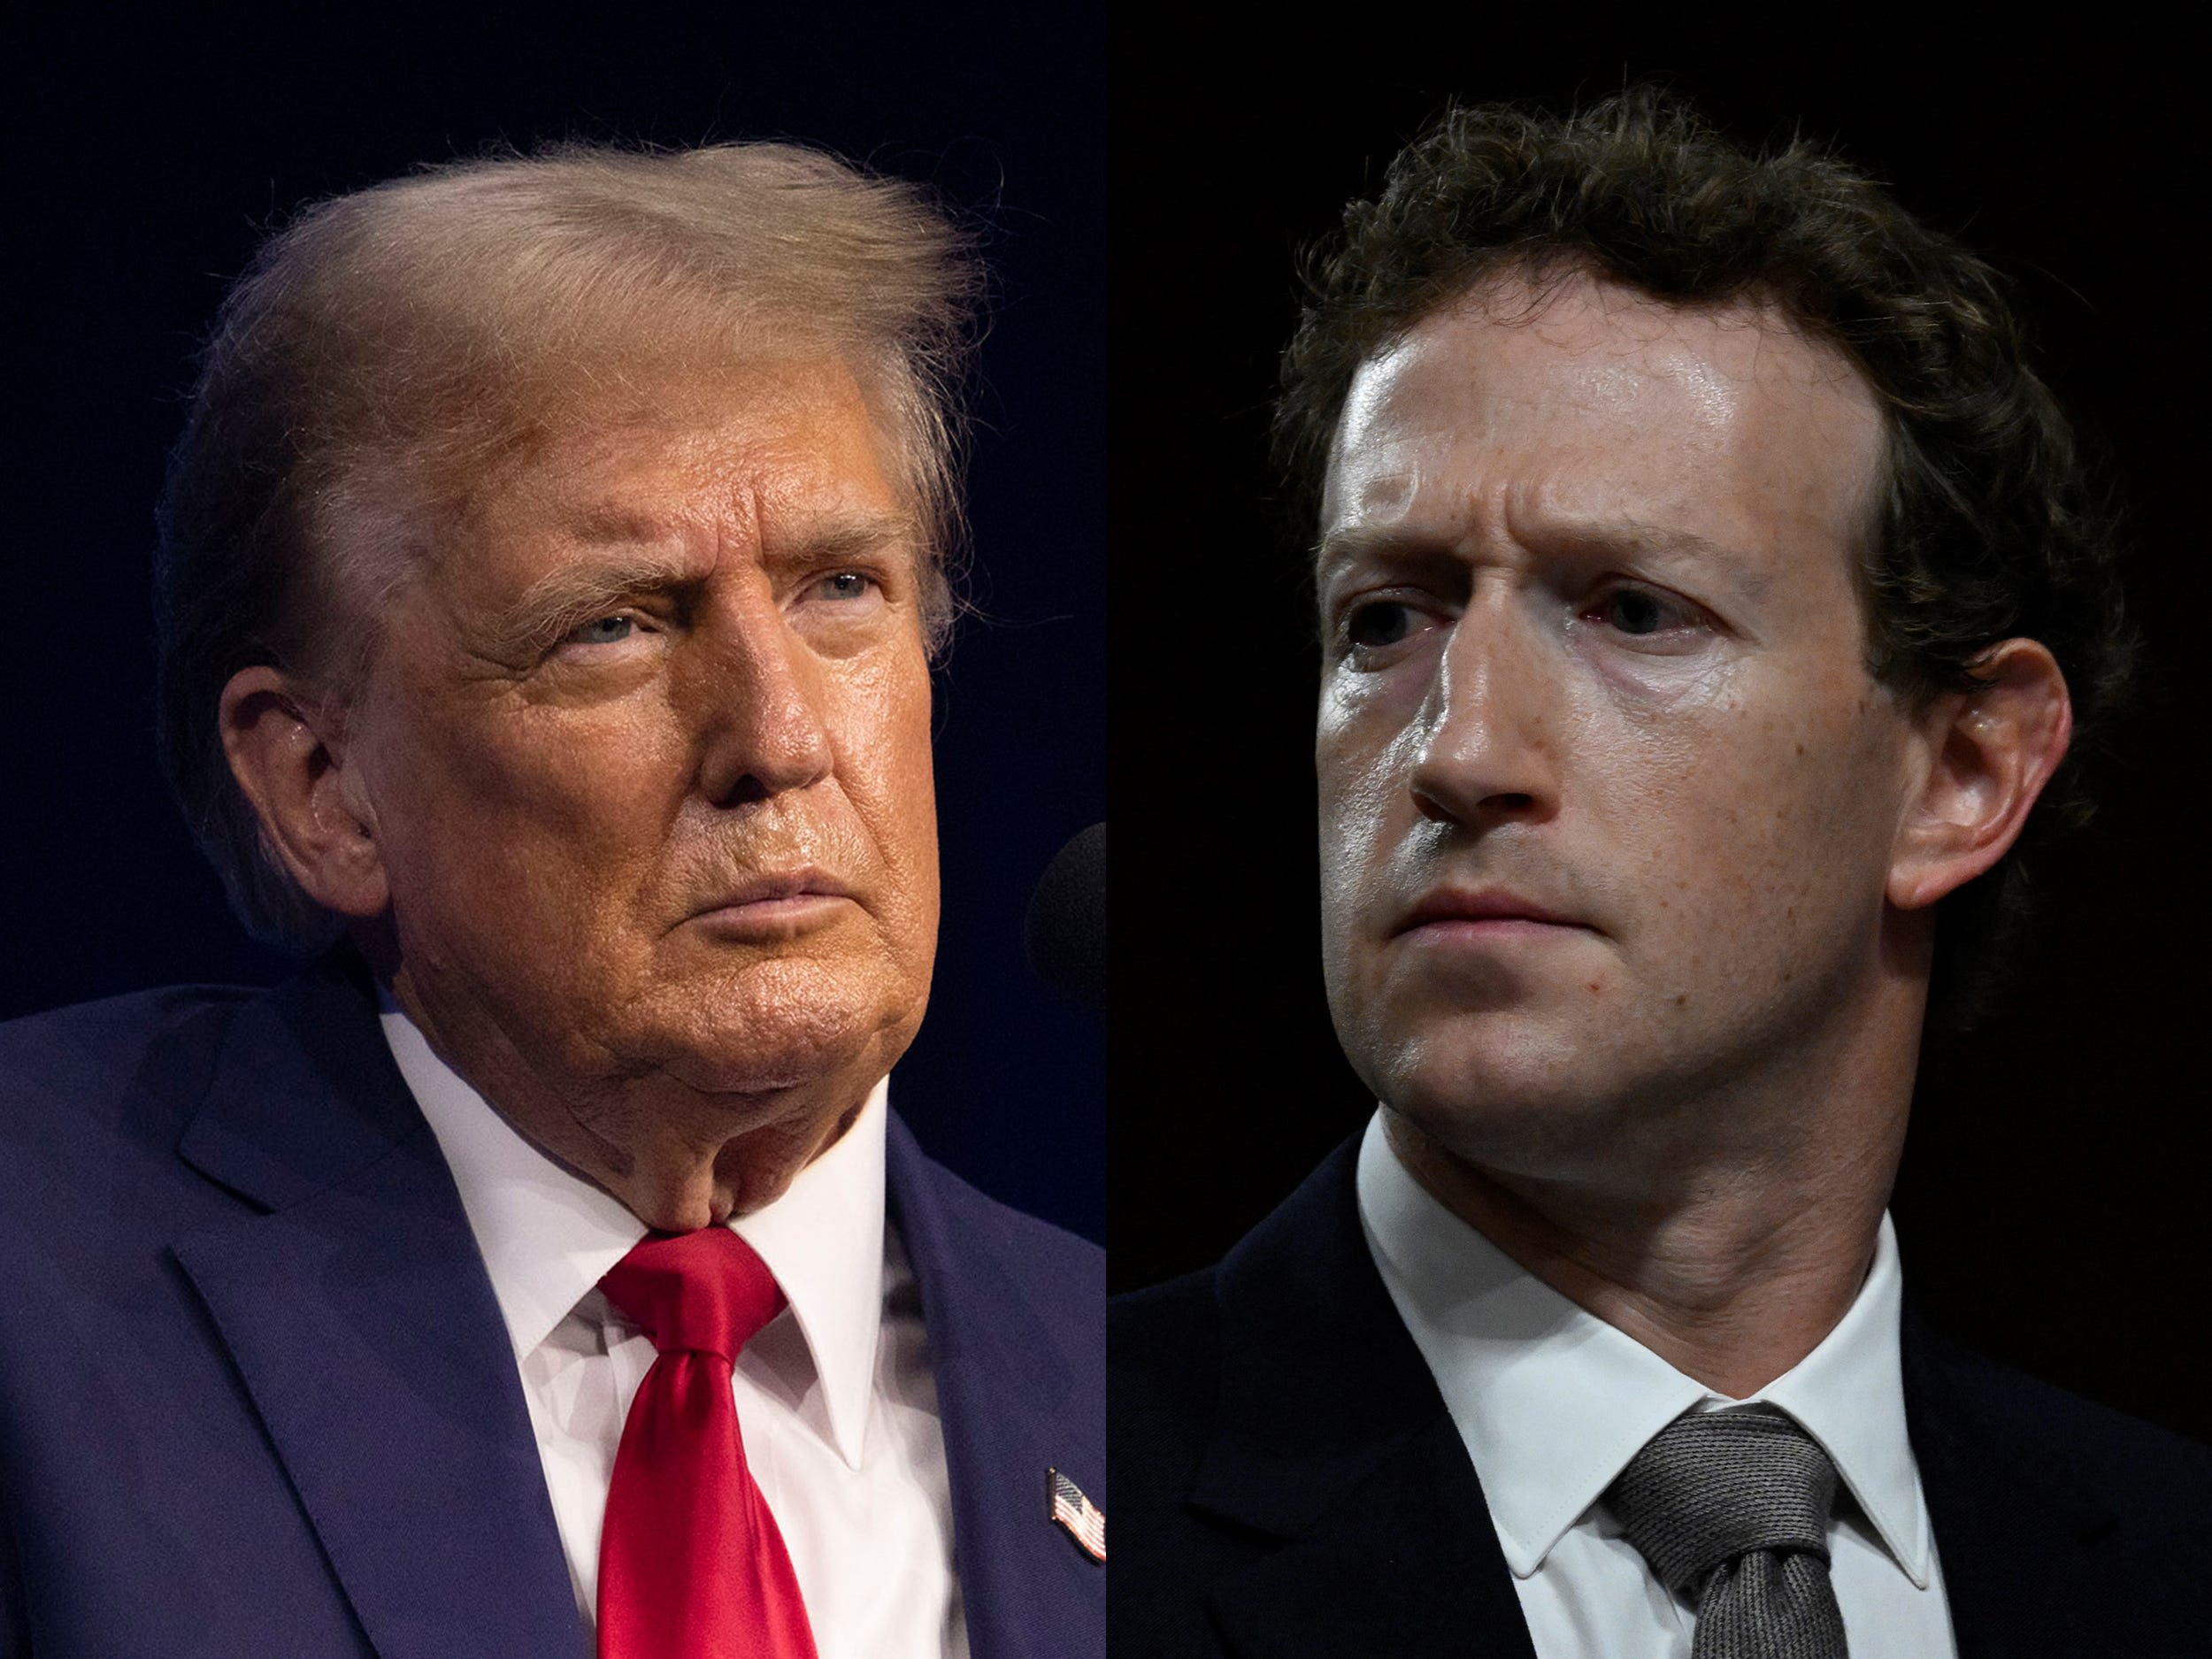 Donald Trump says he talked to Mark Zuckerberg after surviving the shooting. He's had a long feud with the Meta CEO.